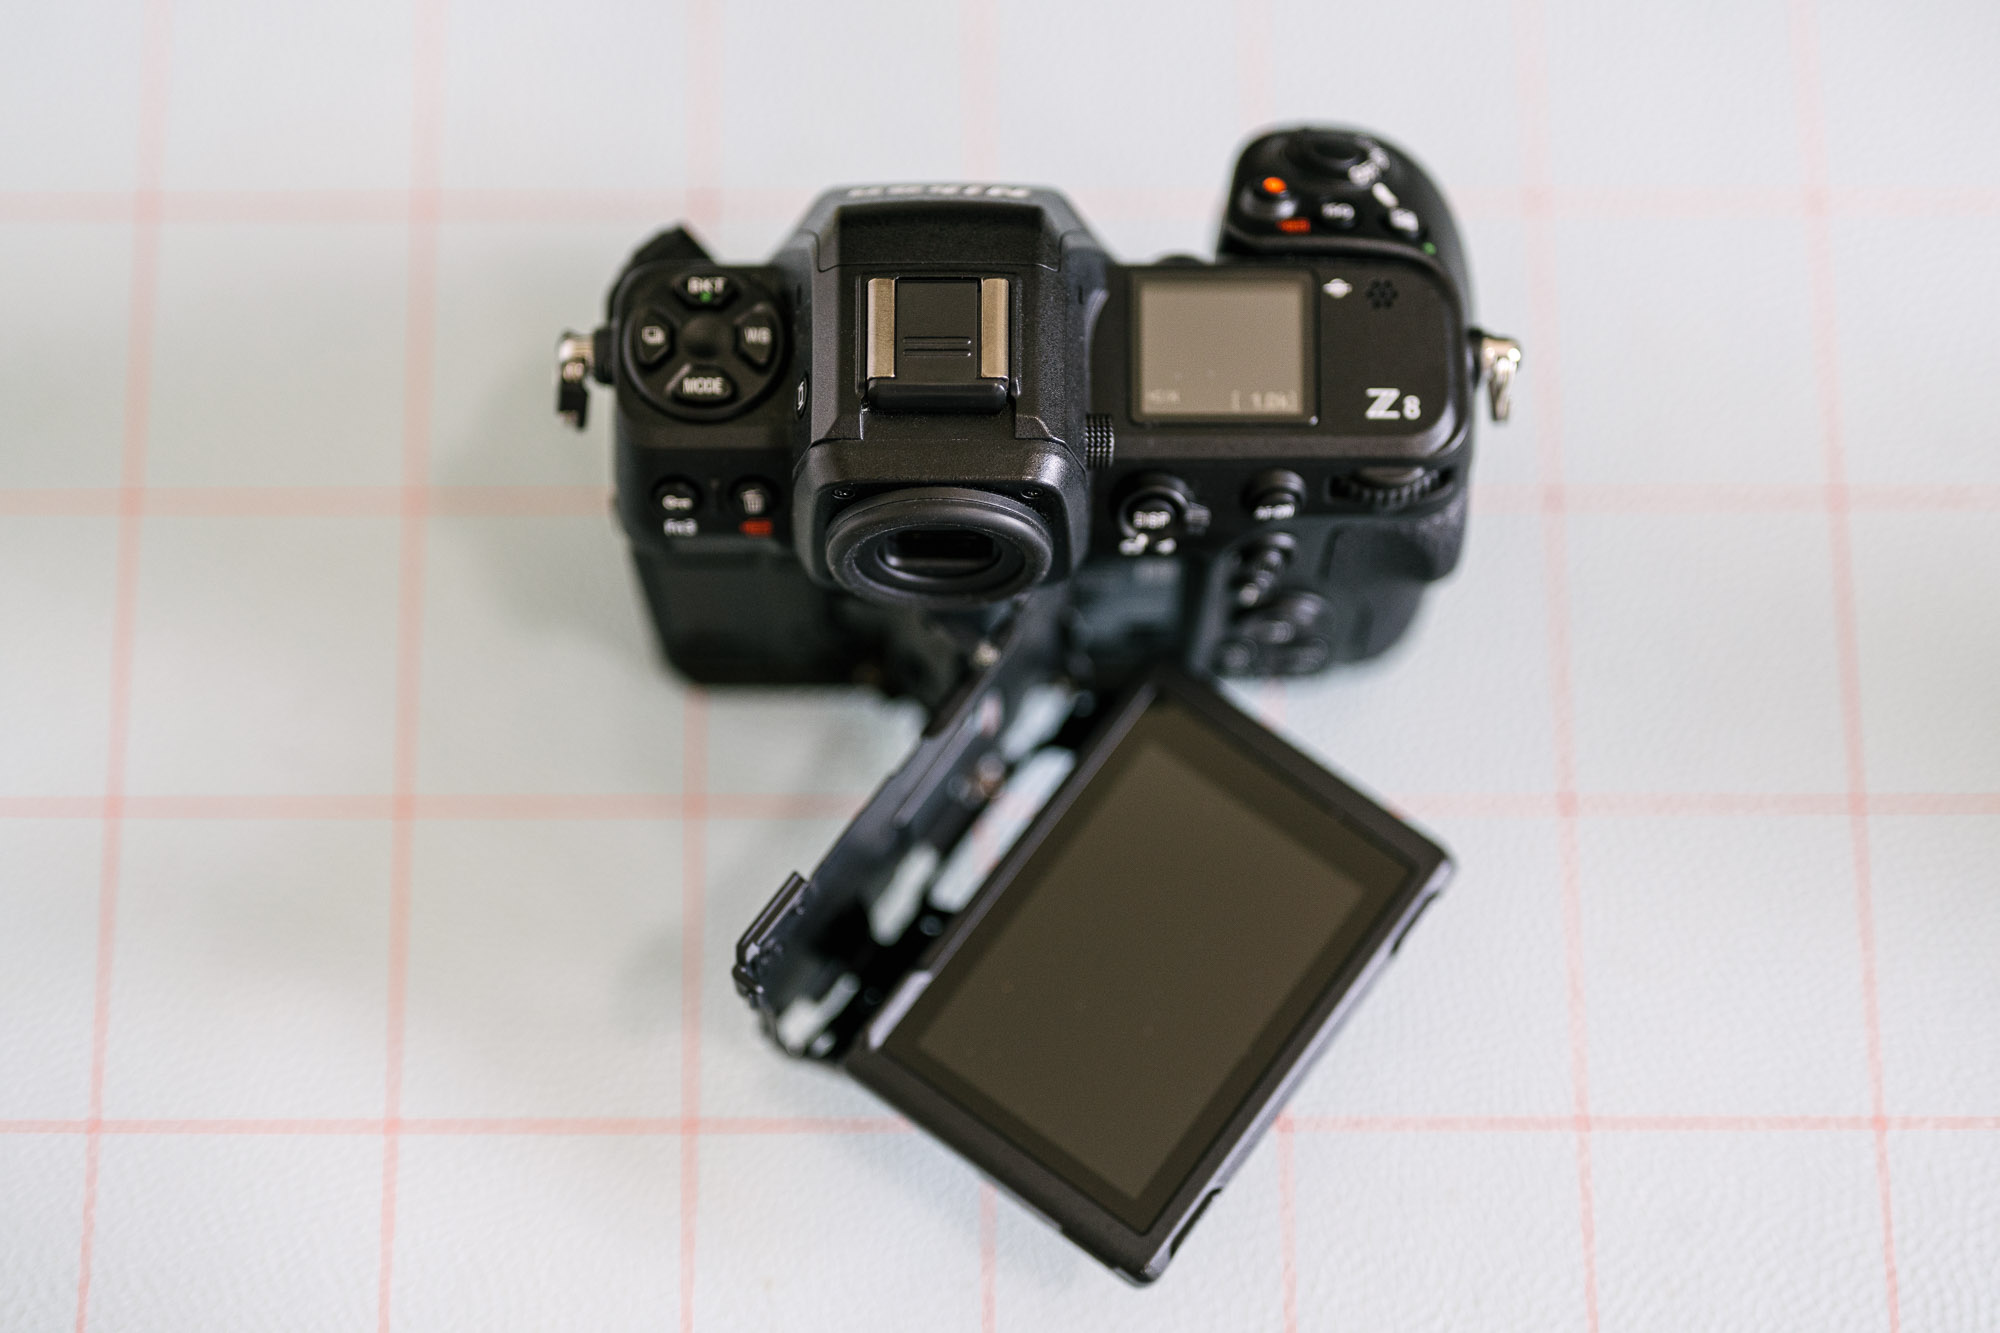 Nikon Z8 hands-on: Digital Photography Review